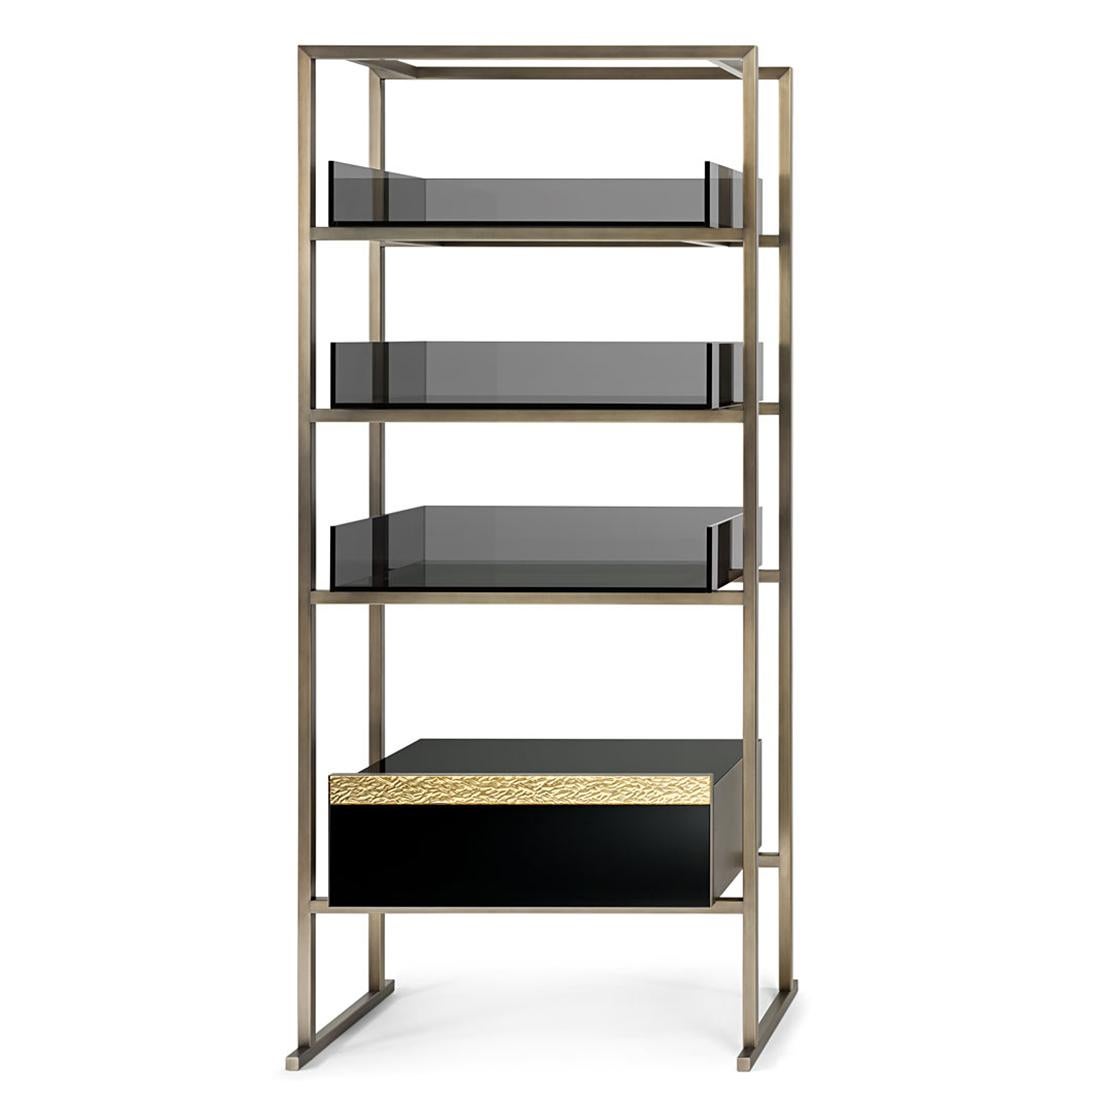 Shelf Pietro with frame structure in metal in burnished
and antiqued brass finish. With 3 shelves in black glass.
Structure and inside drawer in matt varnished grey wood,
drawers case's top and drawer in black glass with golden
glass. Sides in